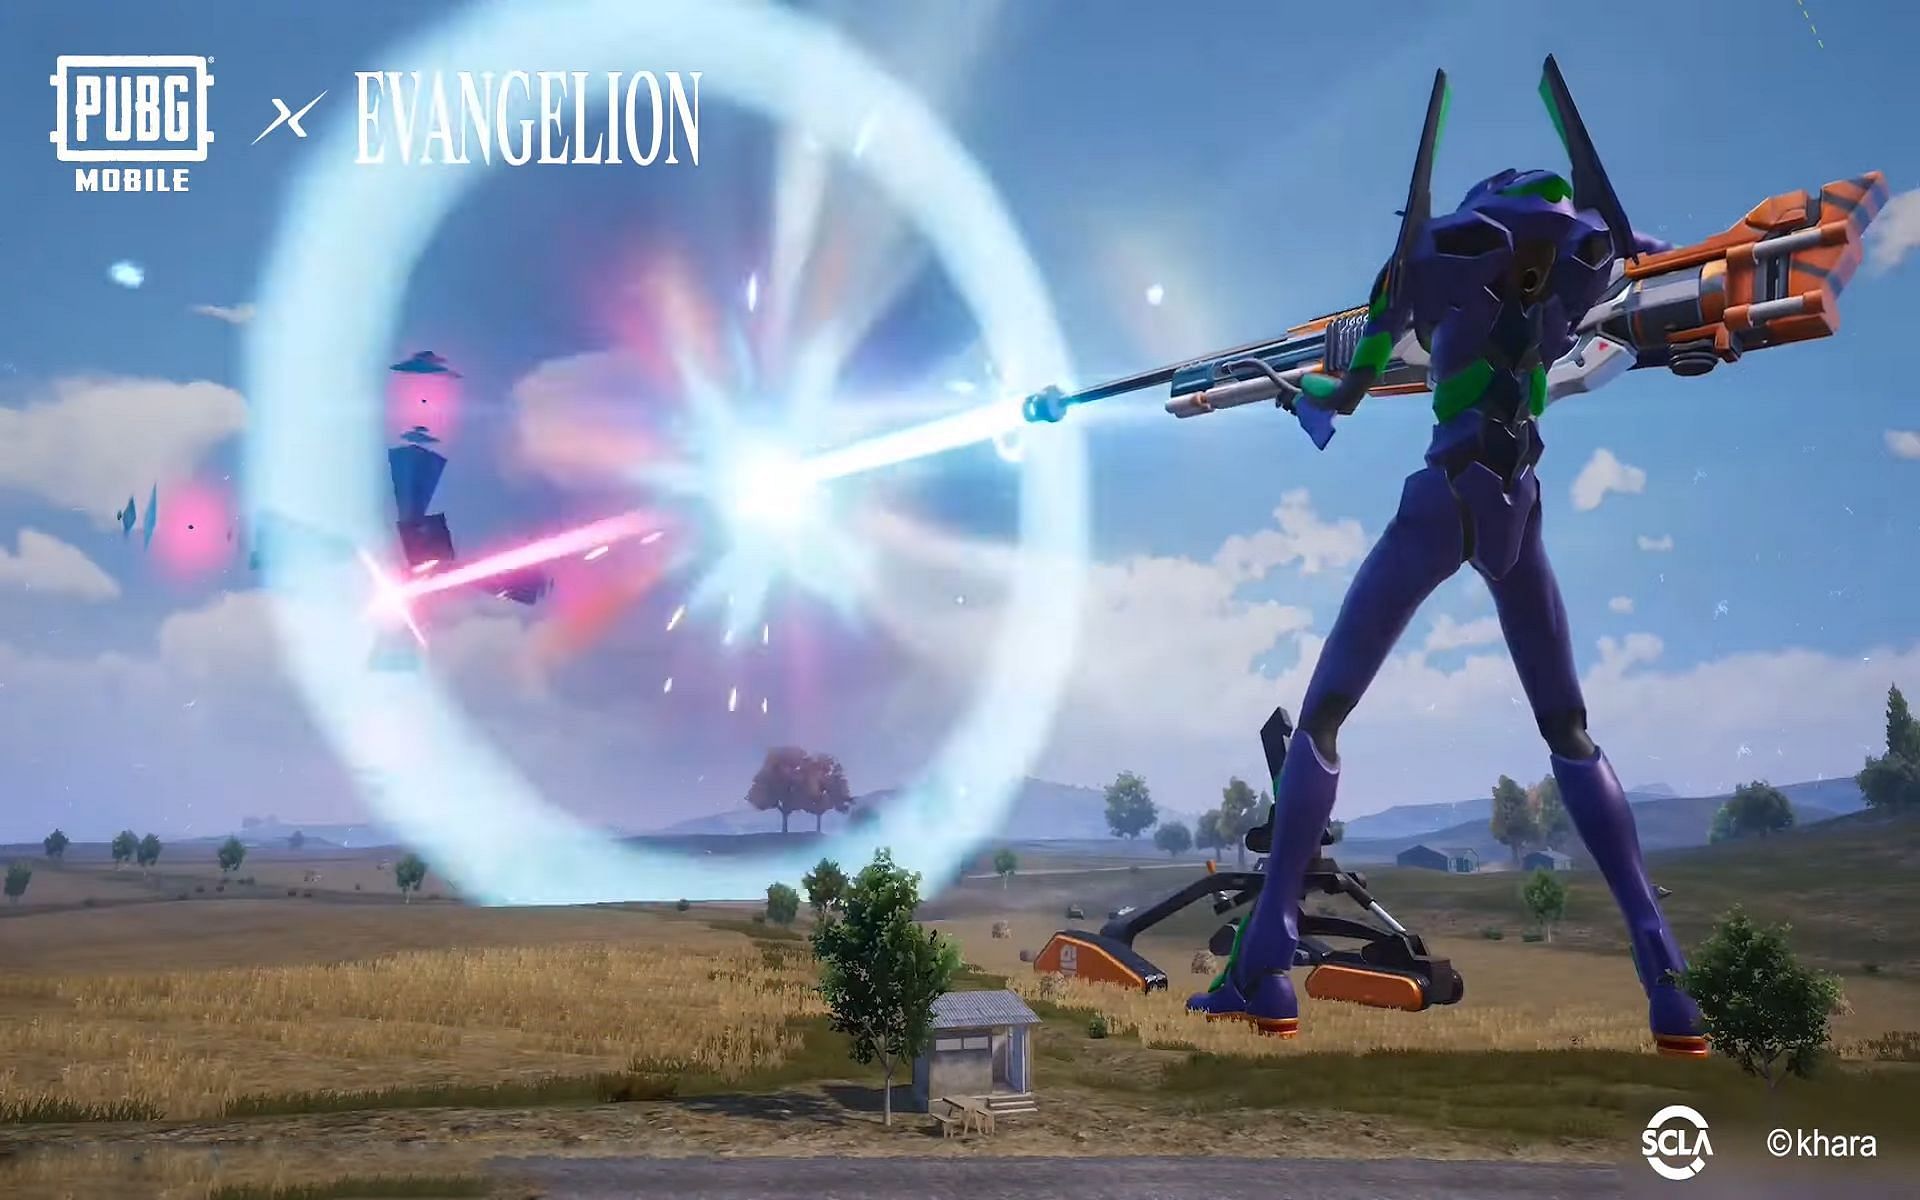 The new update will also mark the start of the crossover with Evangelion (Image via PUBG Mobile)